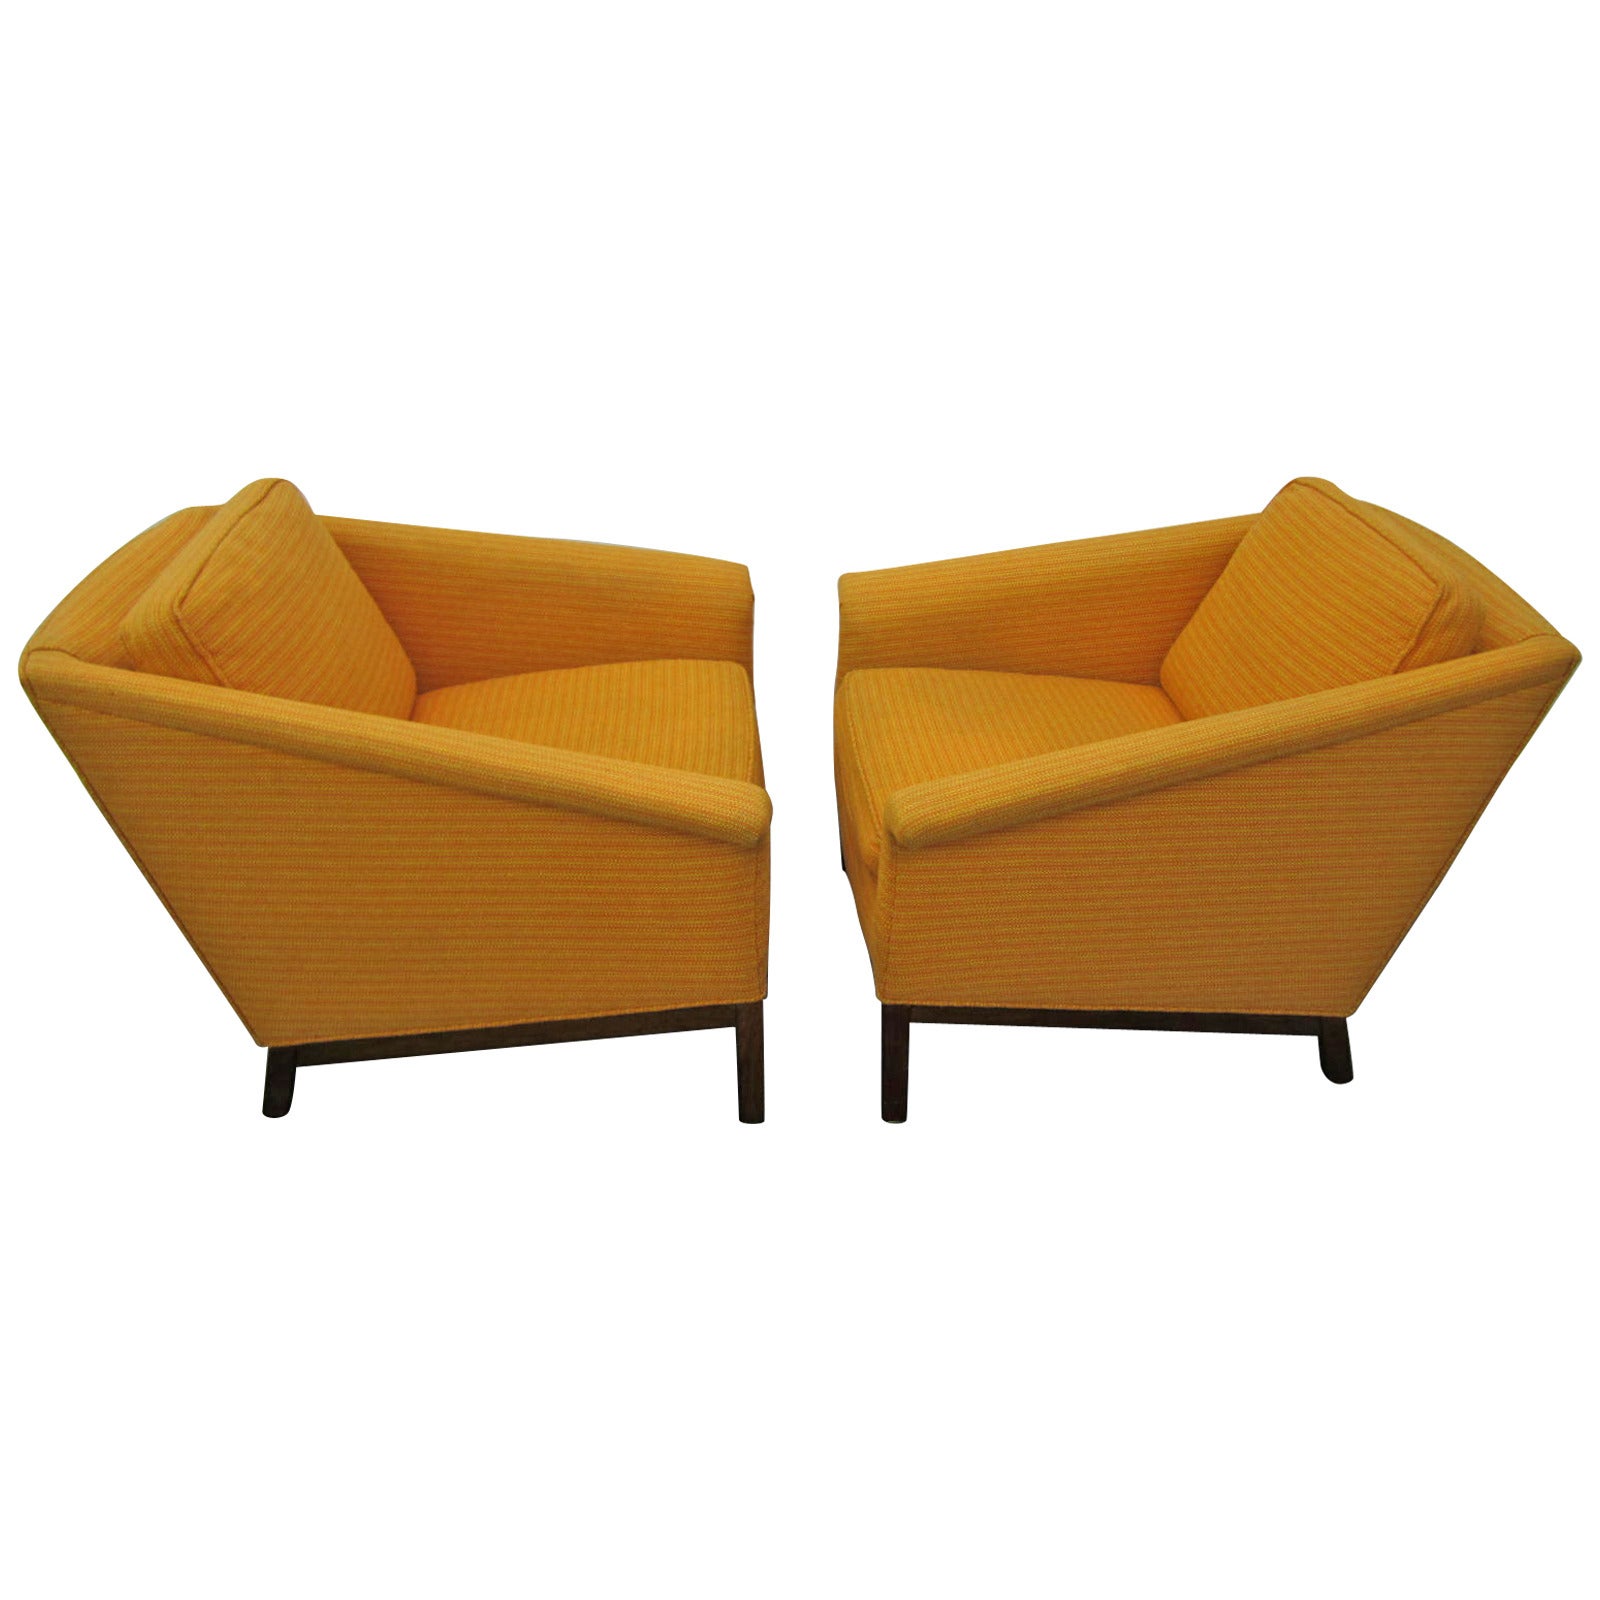 Fantastic Probber Style Angular Arm Lounge Chairs, Mid-Century Modern For Sale